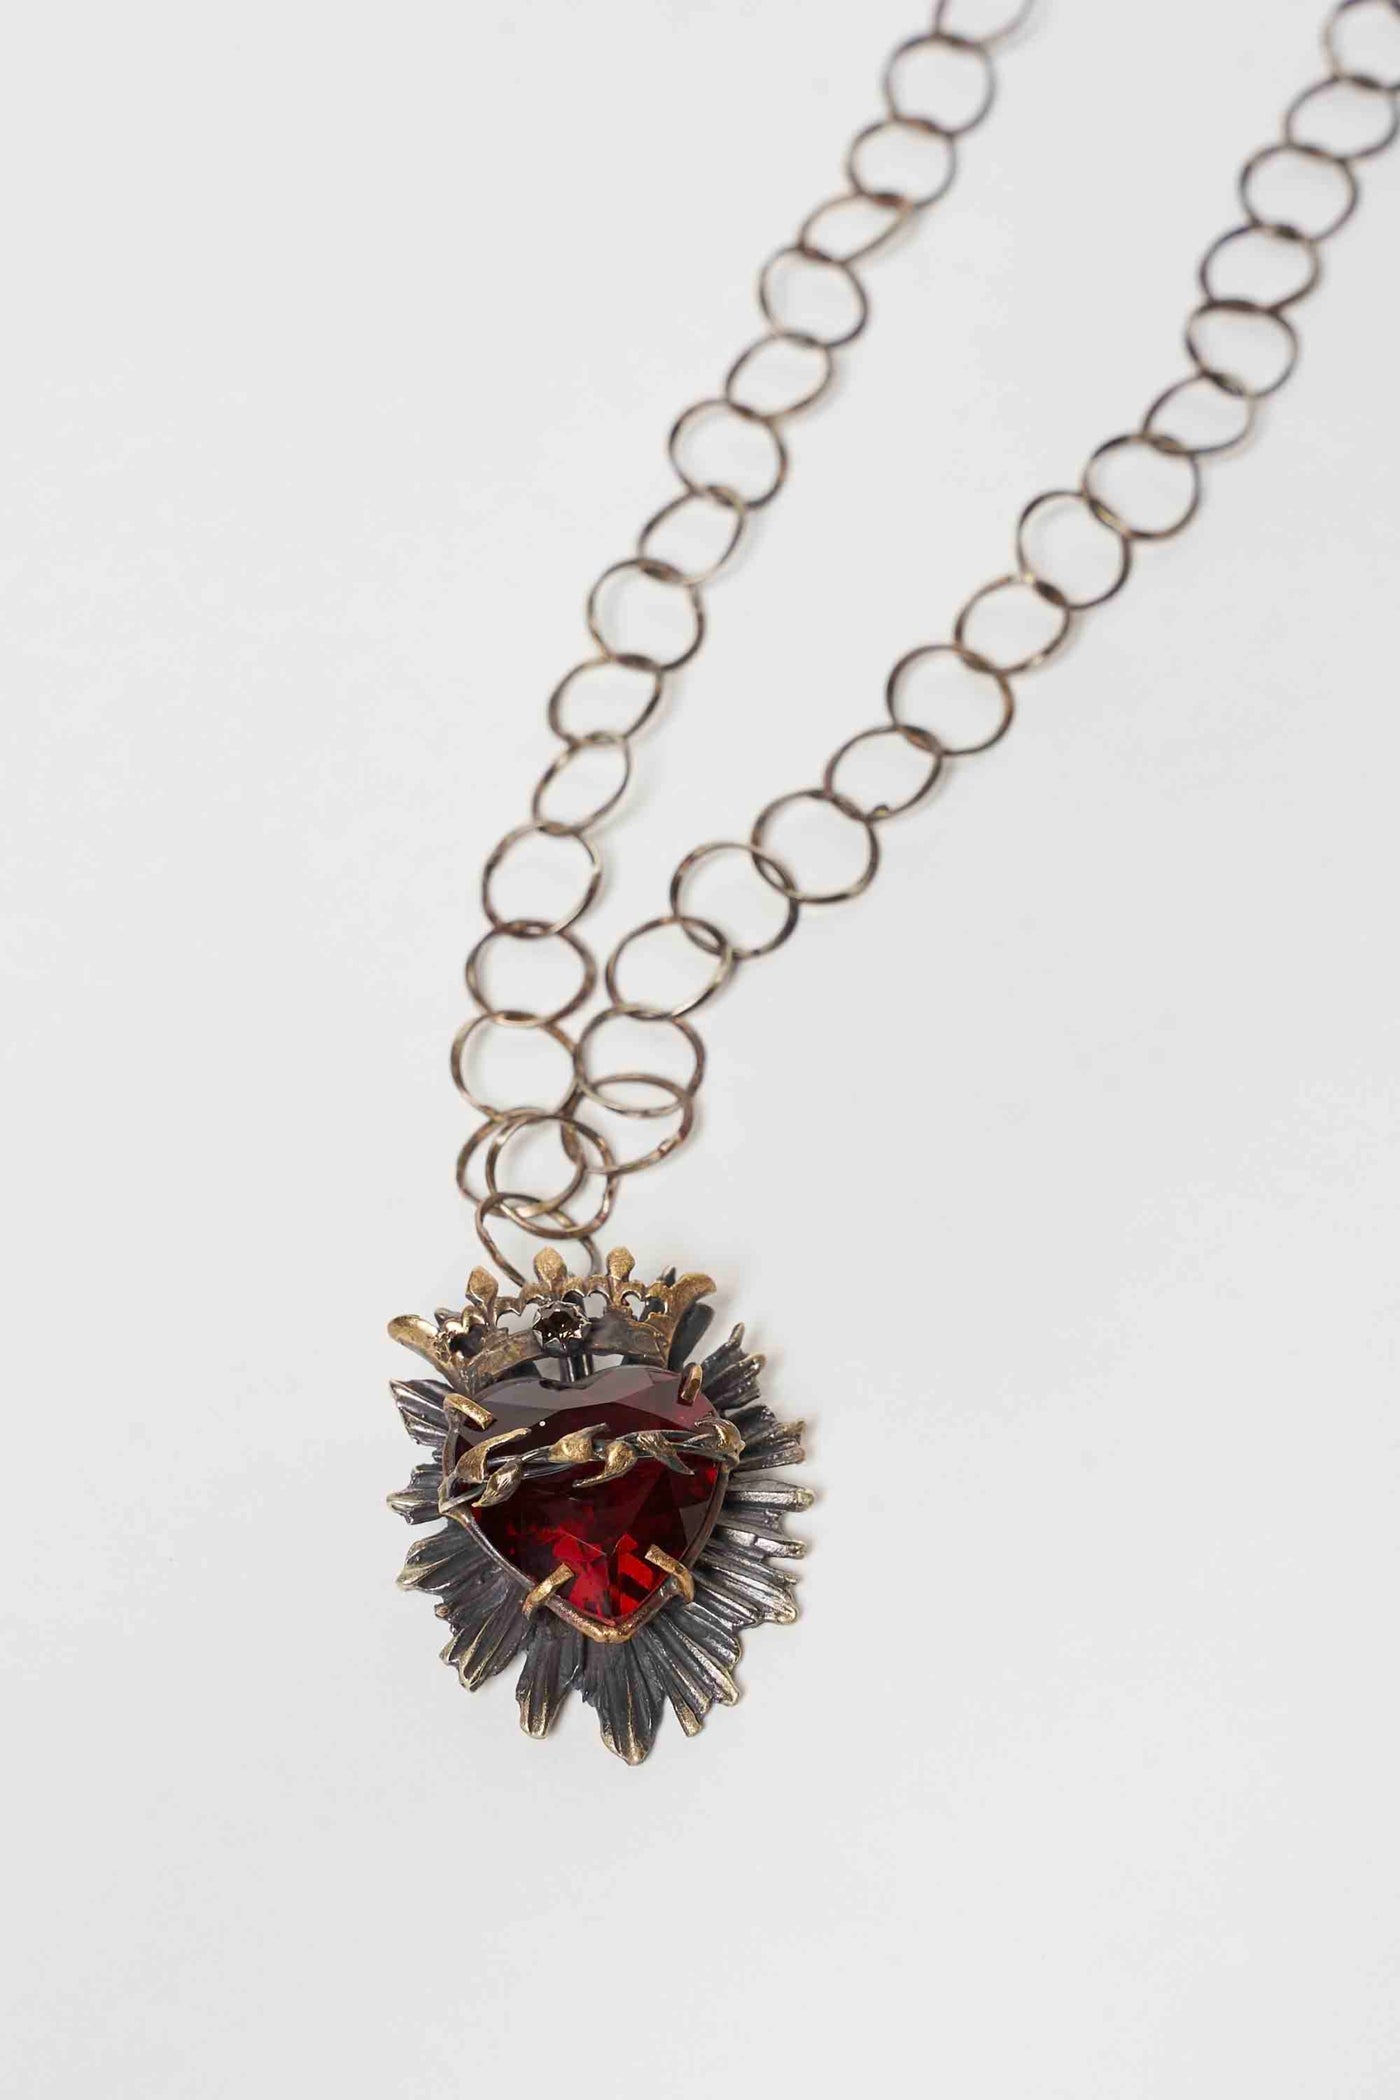 CORAZON SAGRADO NECKLACE WITH HAND FACETED GLASS